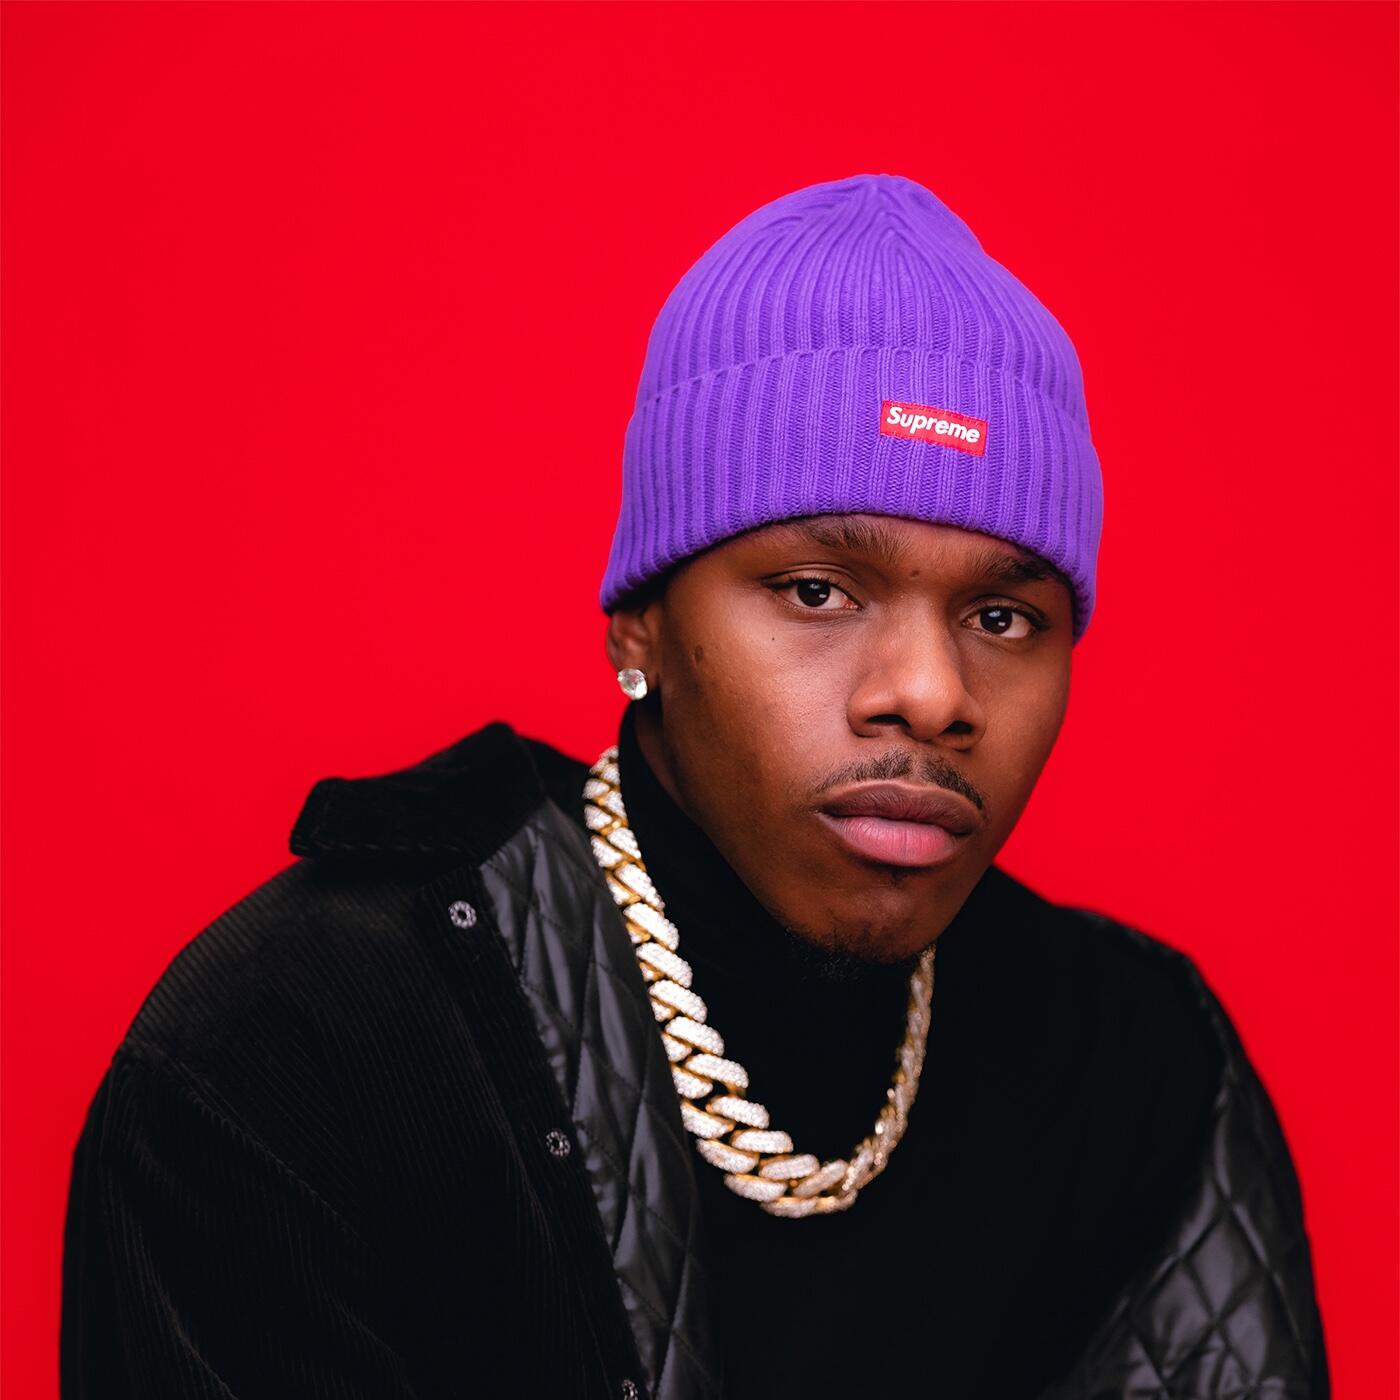 DaBaby: albums, songs, playlists